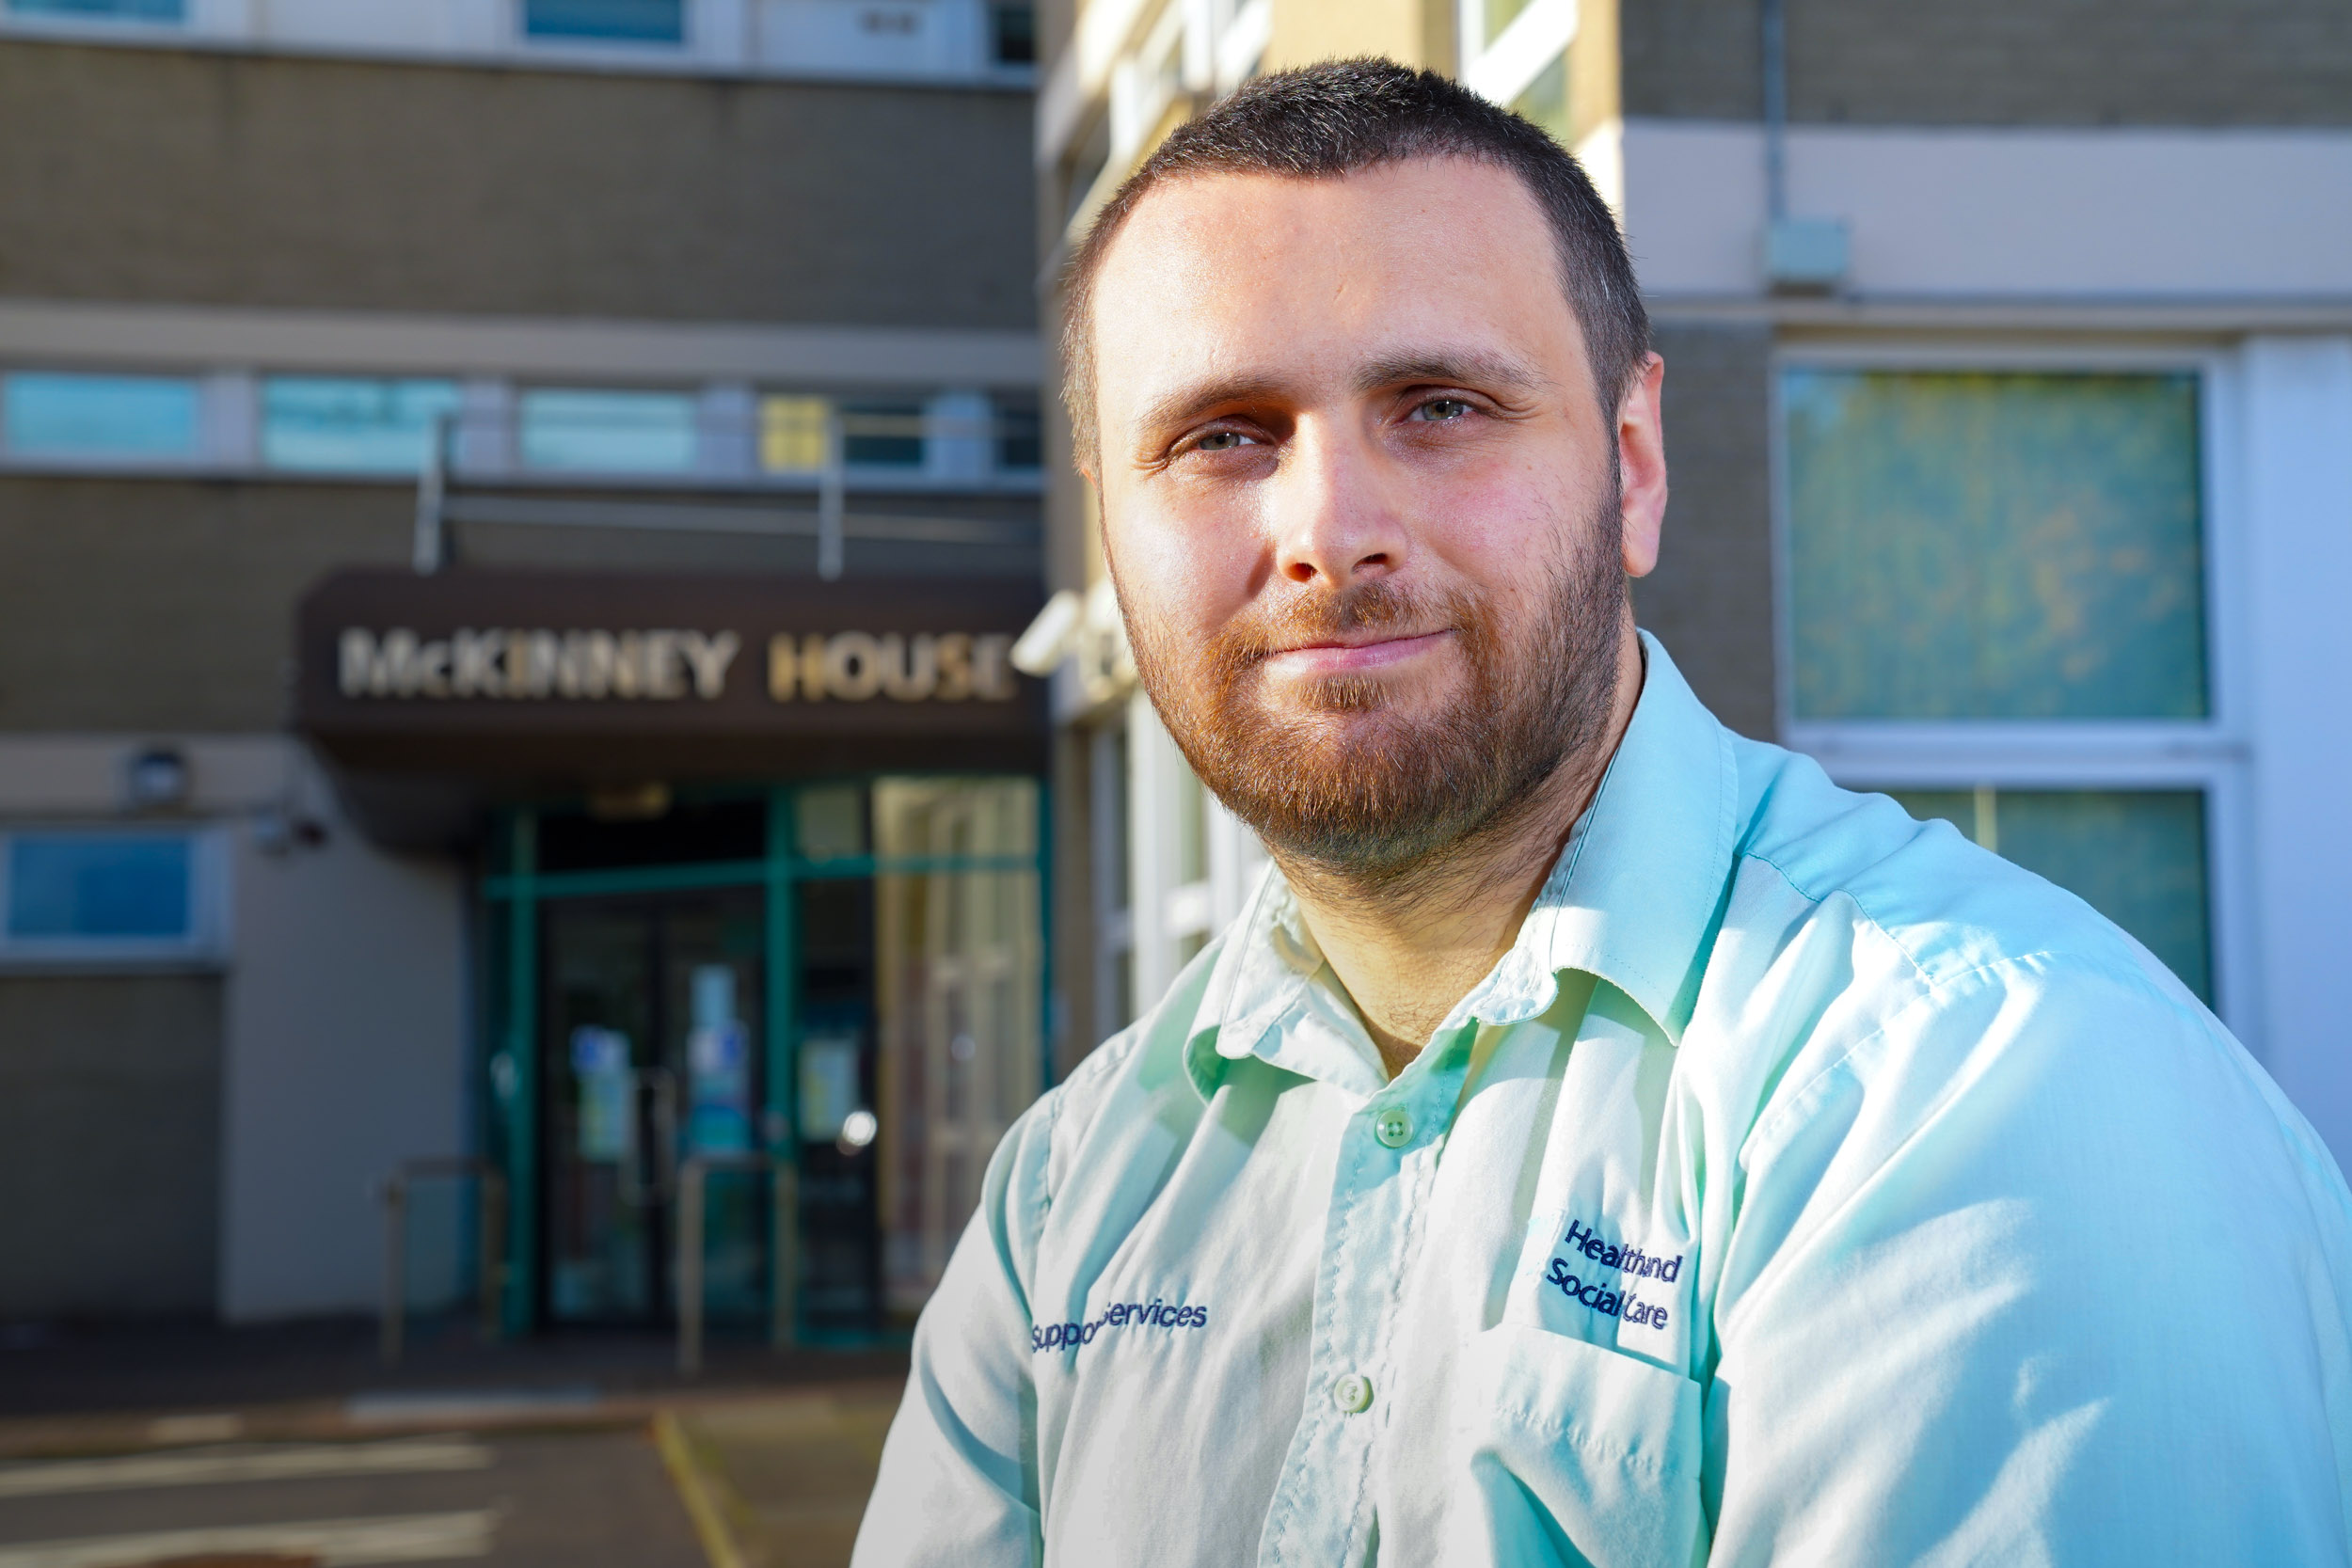 Matthew was supported by Mencap NI into his job in Patient Client Support Services at Musgrave Park Hospital